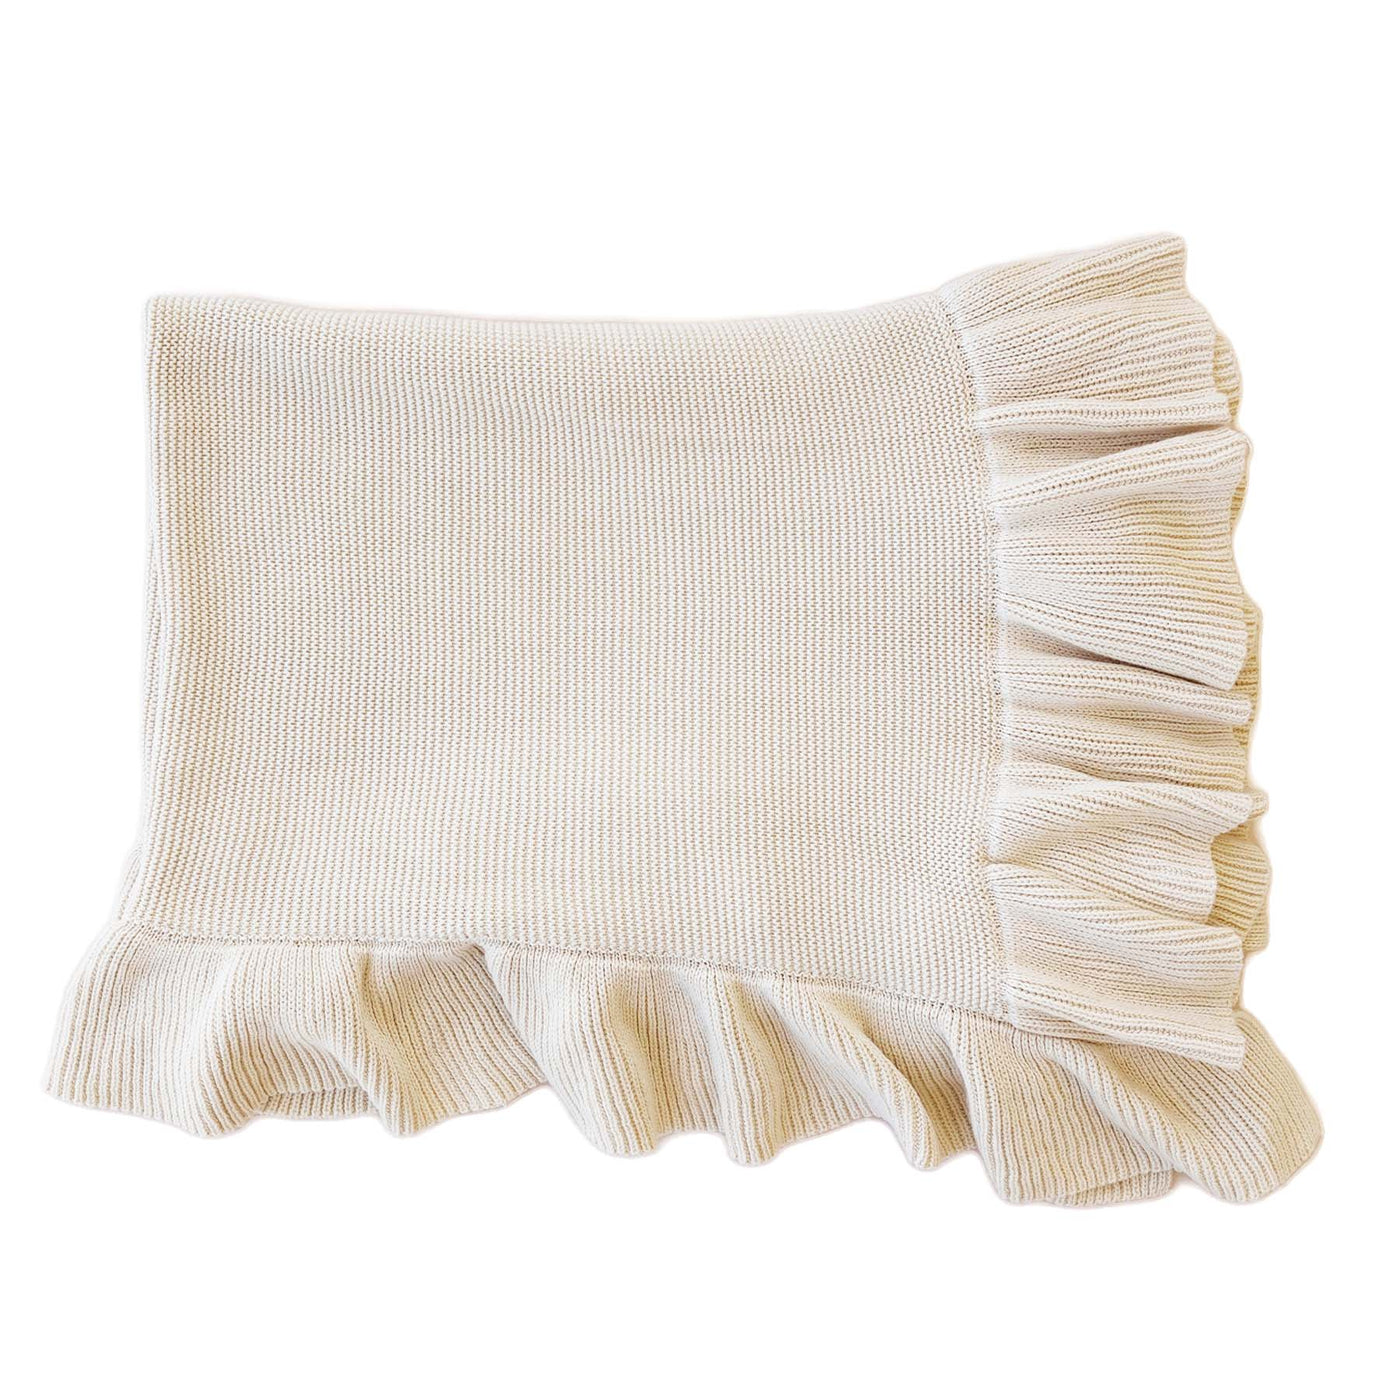 sand blanket with ruffle 